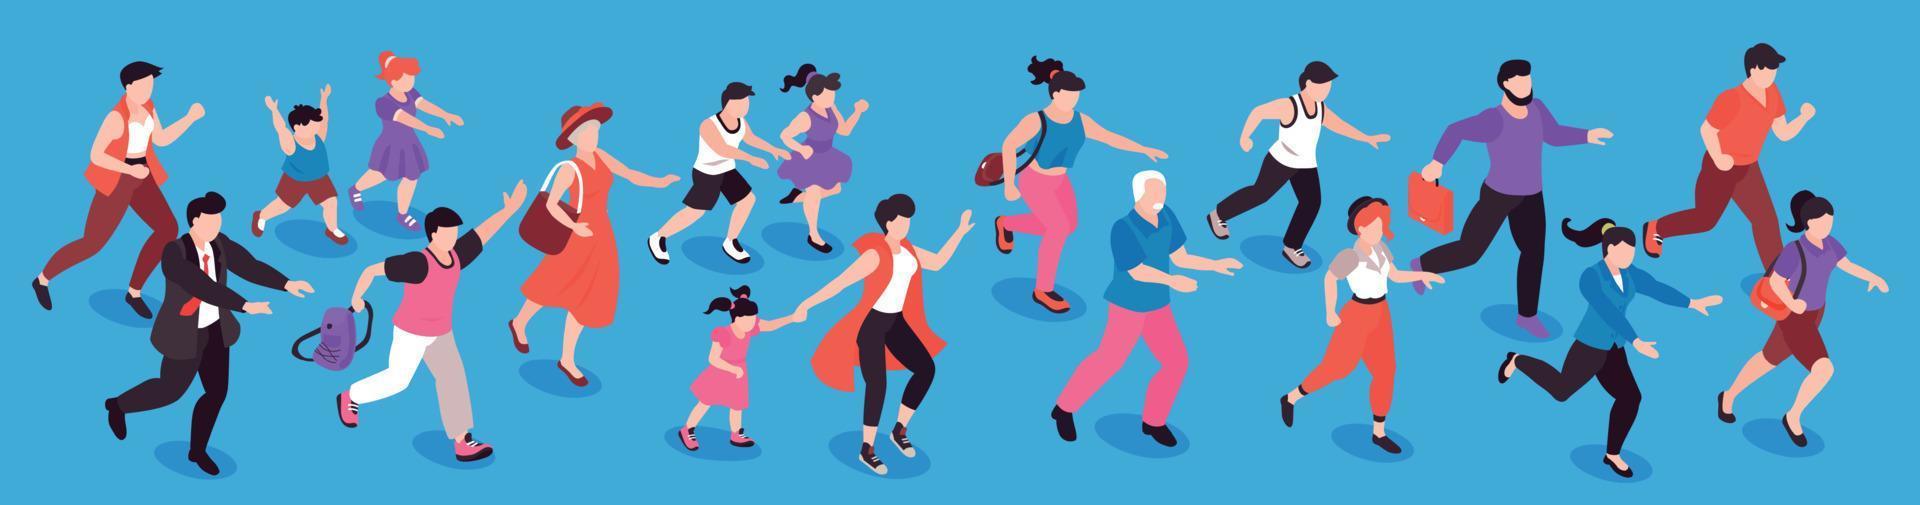 People Running Isometric Concept vector